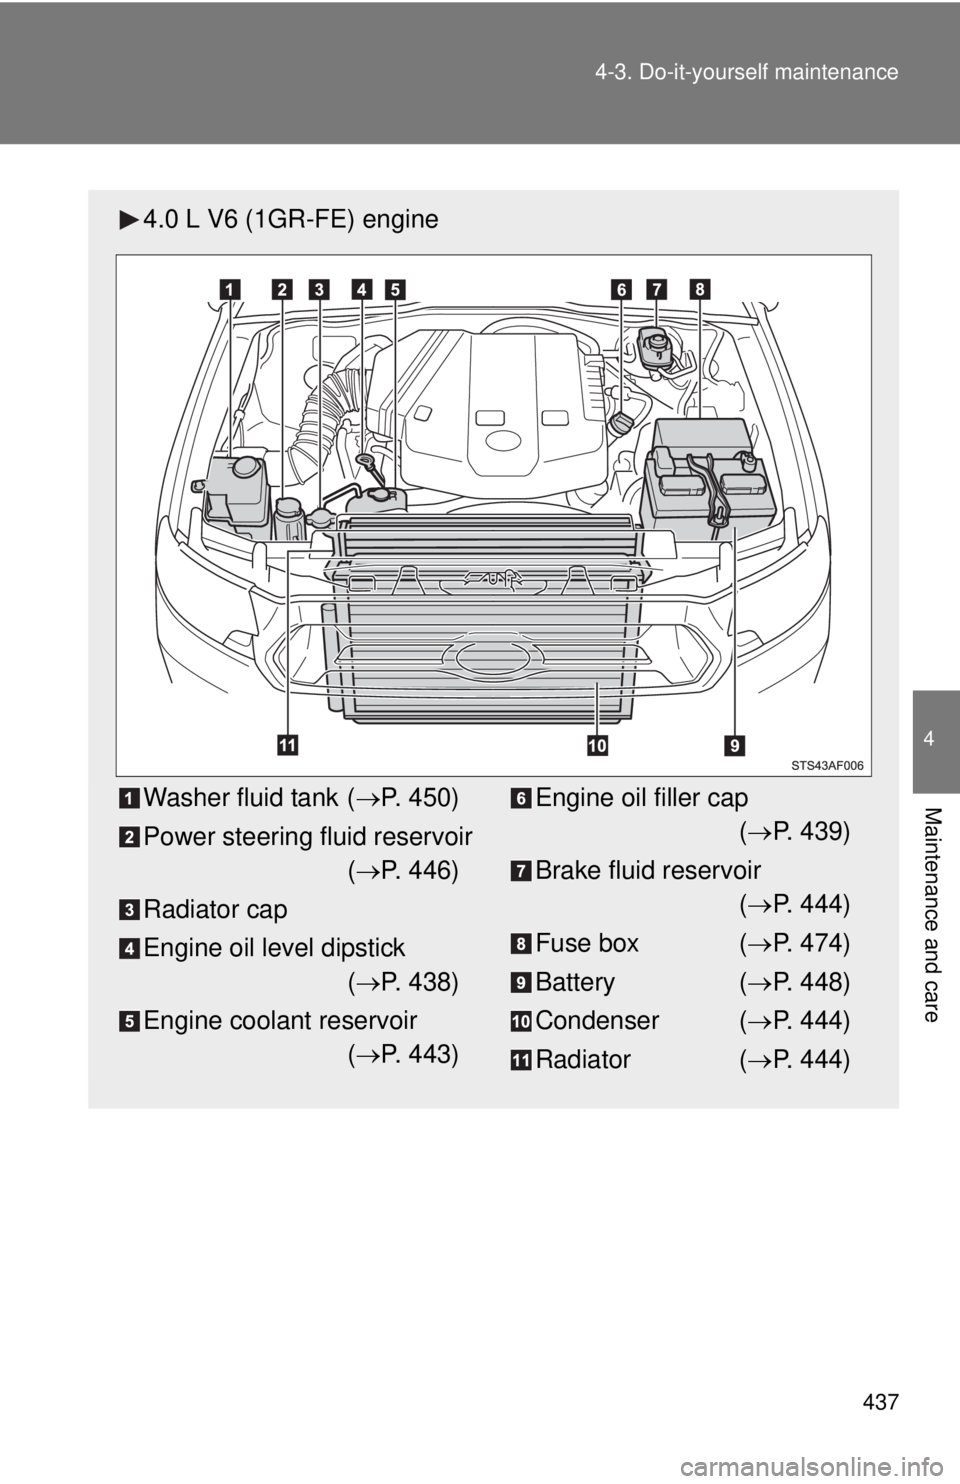 TOYOTA TACOMA 2012  Owners Manual (in English) 437
4-3. Do-it-yourself maintenance
4
Maintenance and care
4.0 L V6 (1GR-FE) engine
Washer fluid tank (
P. 450)
Power steering fluid reservoir ( P. 446)
Radiator cap
Engine oil level dipstick (�